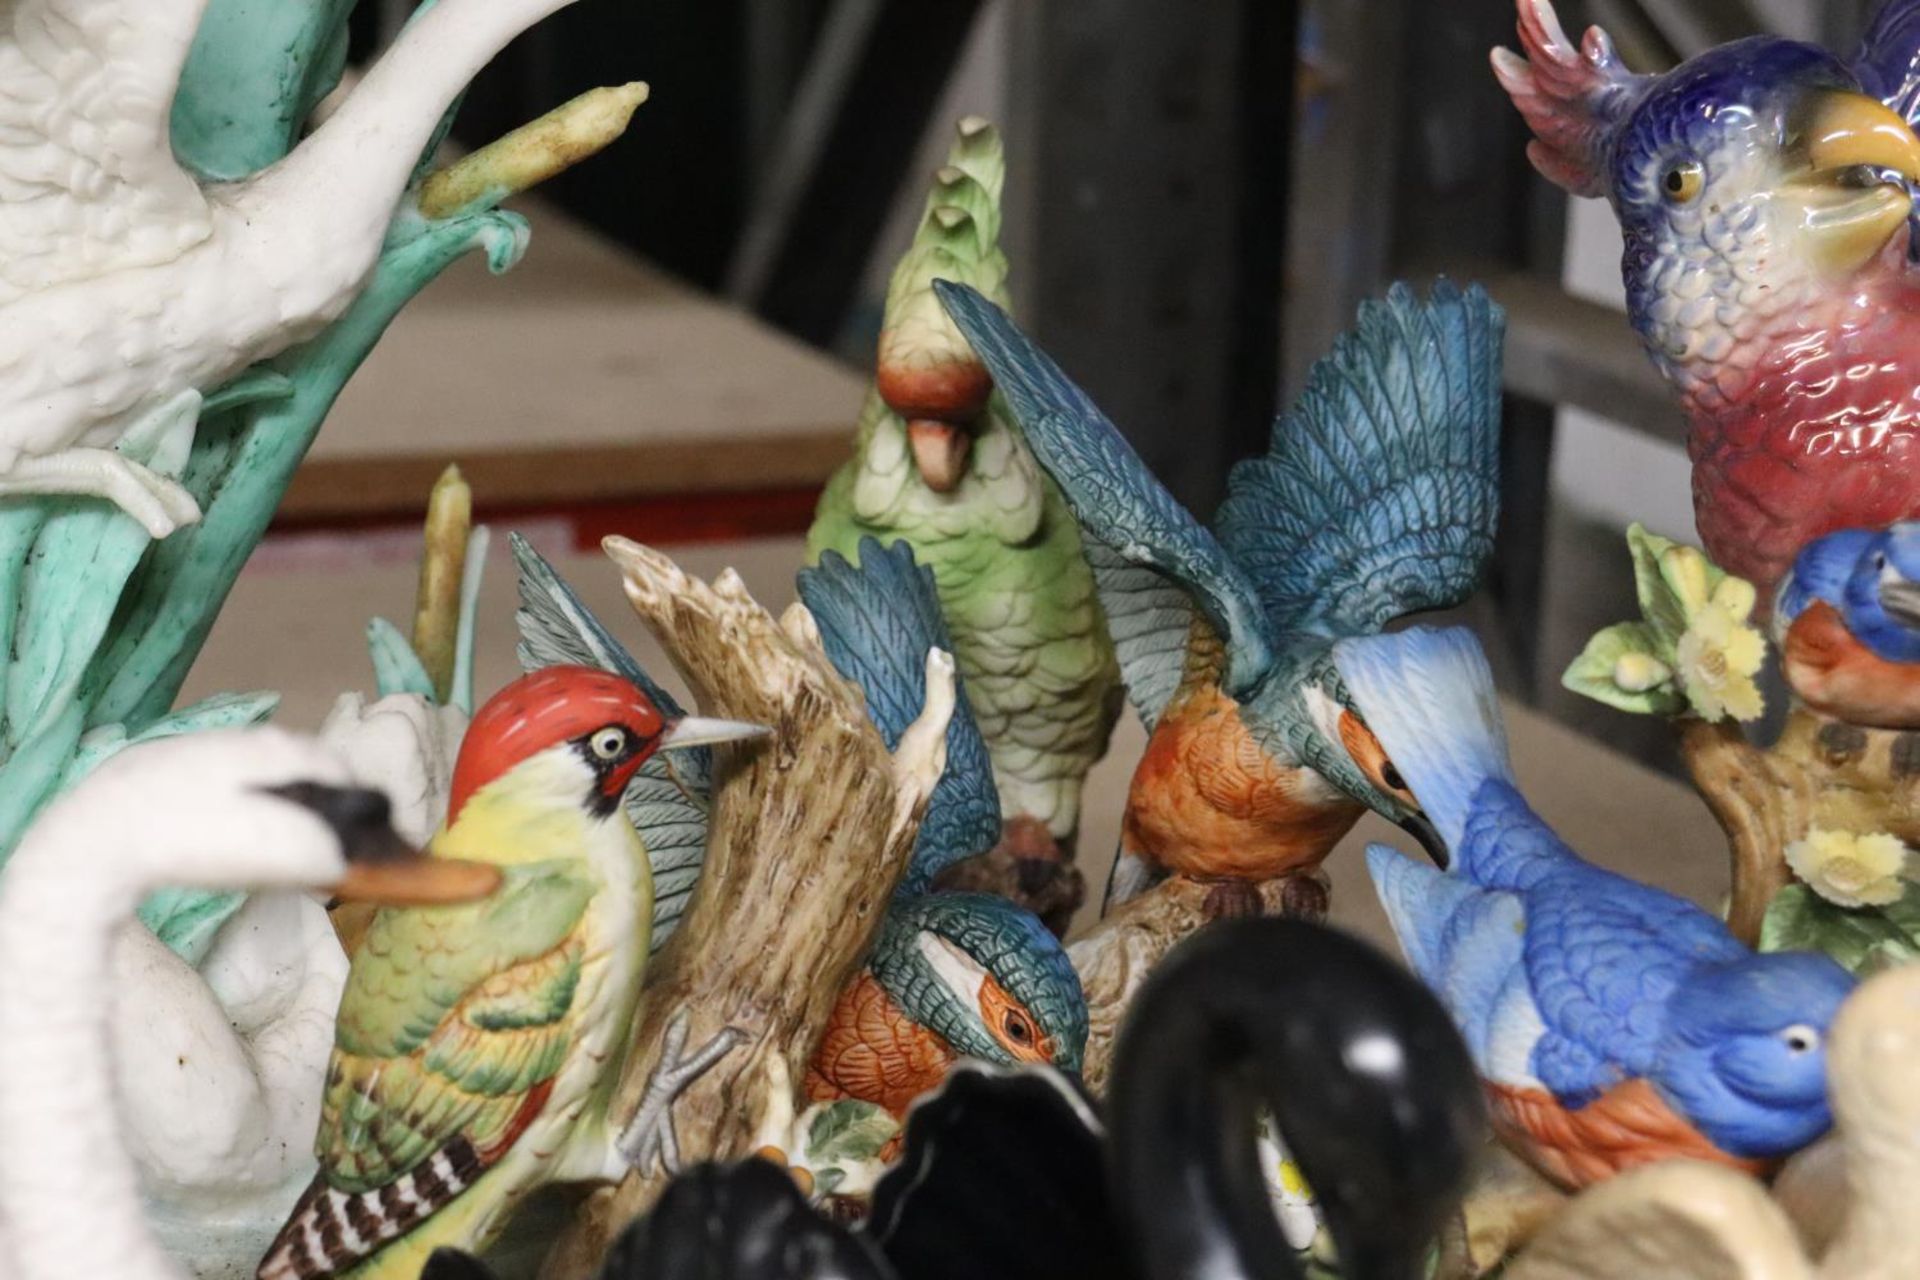 A COLLECTION OF BIRD FIGURINES TO INCLUDE SWANS, A PARROT, WOODPECKER, ETC - Image 6 of 6